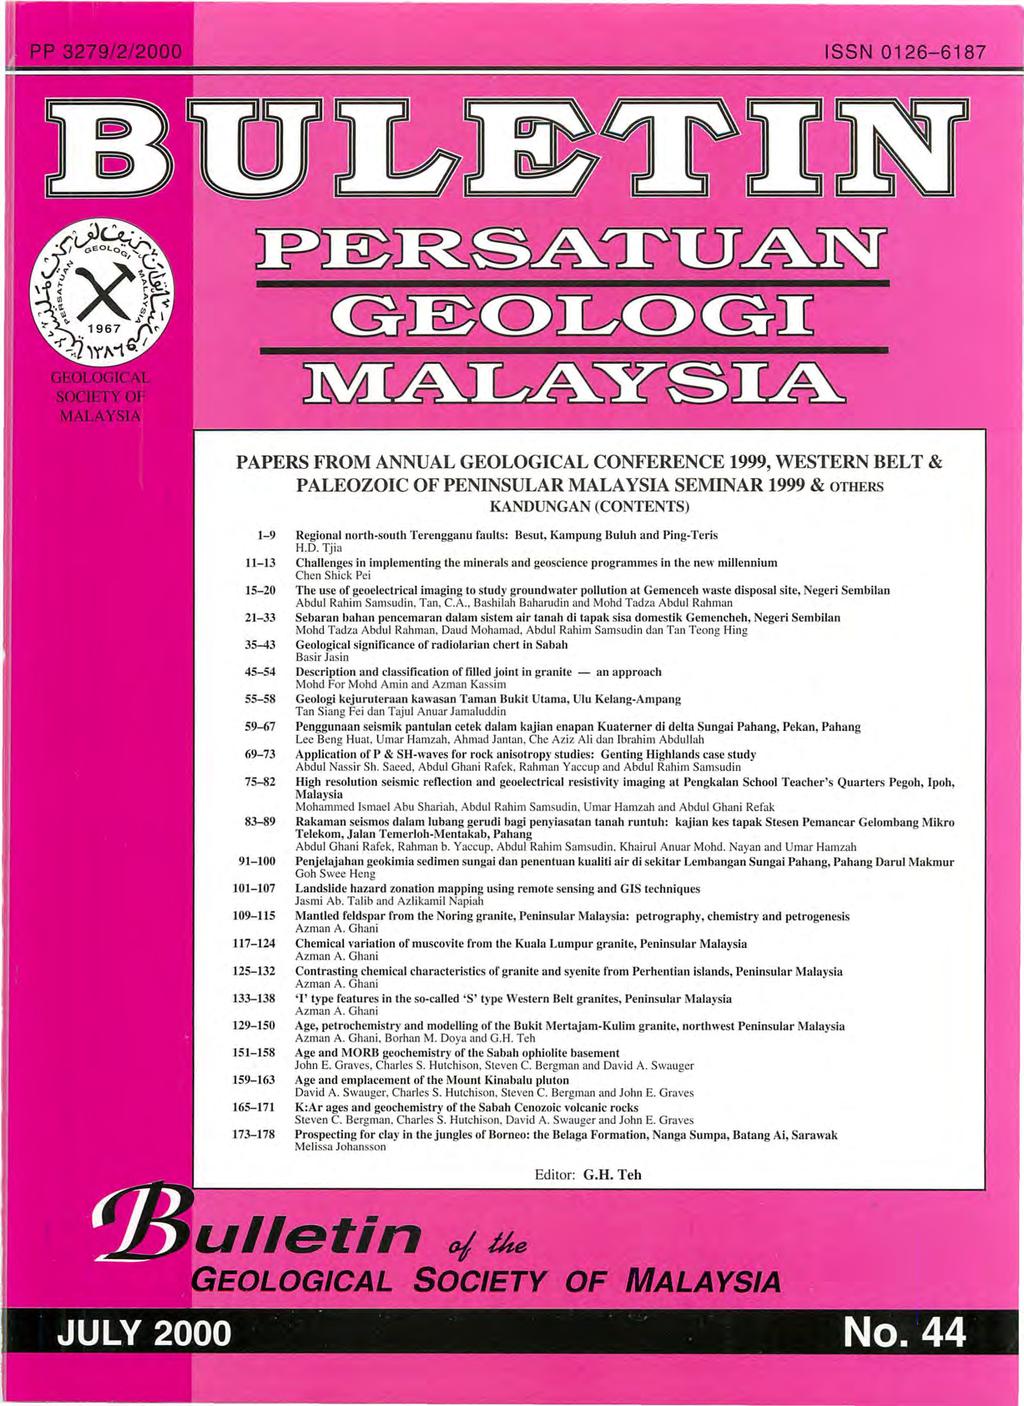 ISSN 0126-6187 PAPERS FROM ANNUAL GEOLOGICAL CONFERENCE 1999, WESTERN BELT & PALEOZOIC OF PENINSULAR MALAYSIA SEMINAR 1999 & OTHERS KANDUNGAN (CONTENTS) 1-9 Regional north-south Terengganu faults: